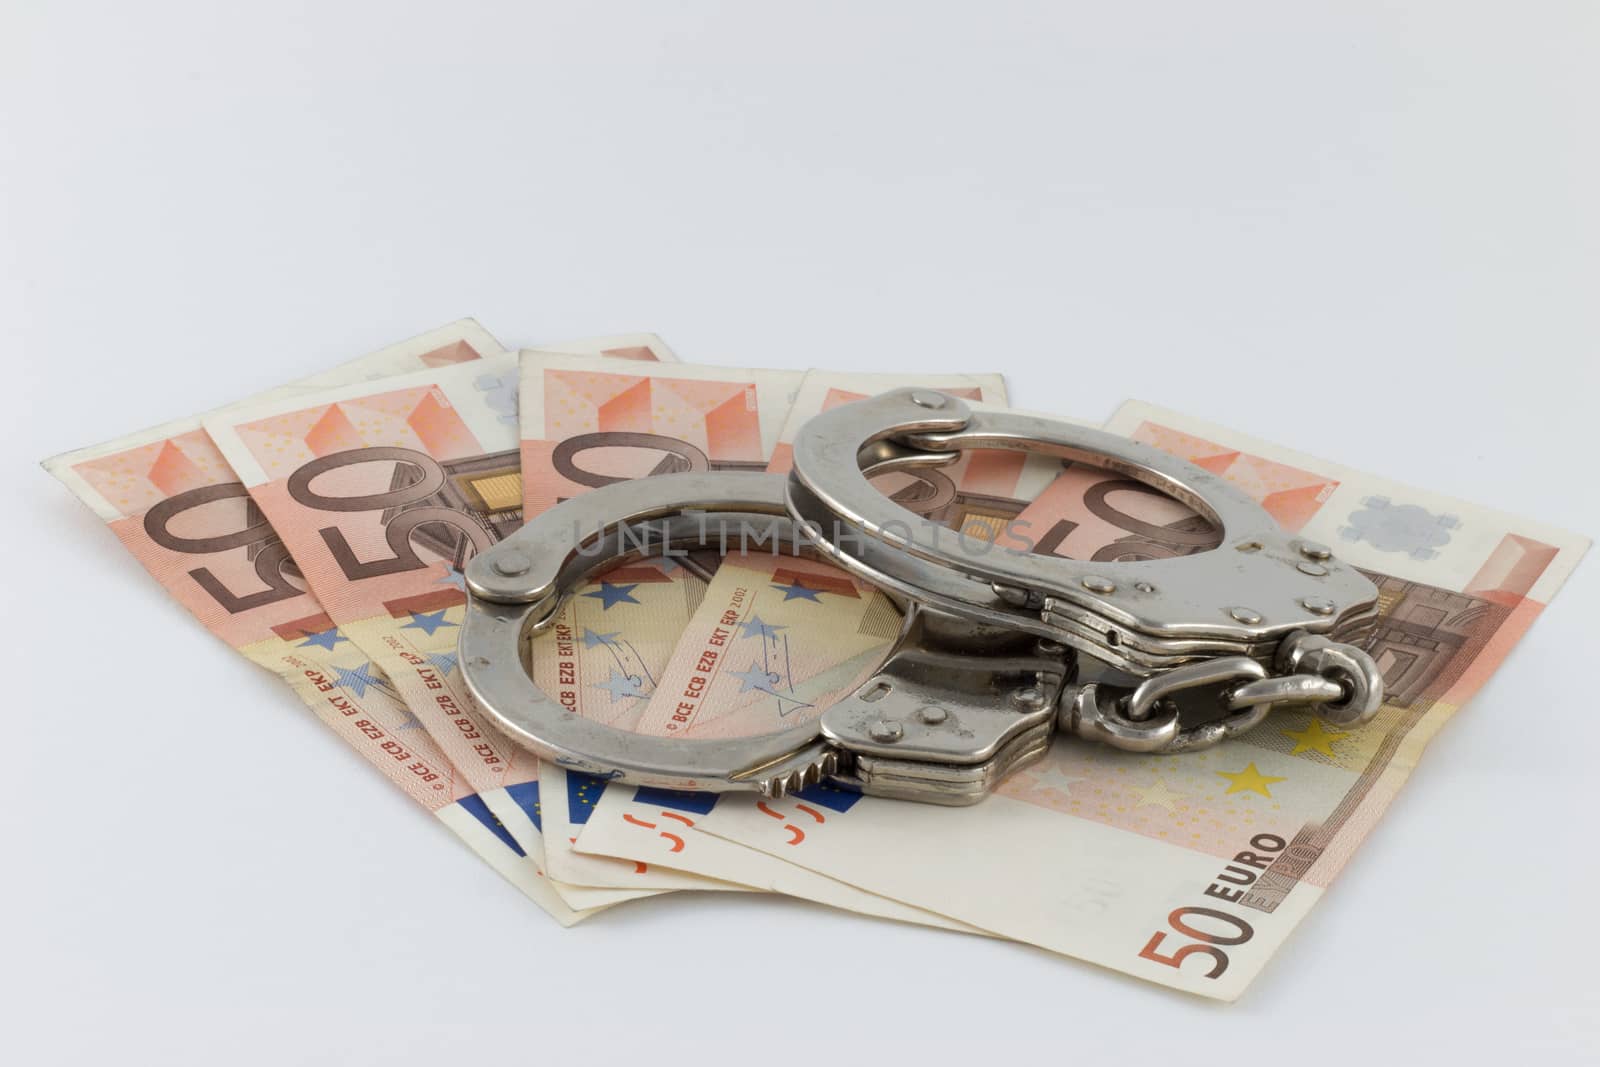 Economic crime, handcuffs with signs of usage on money bills